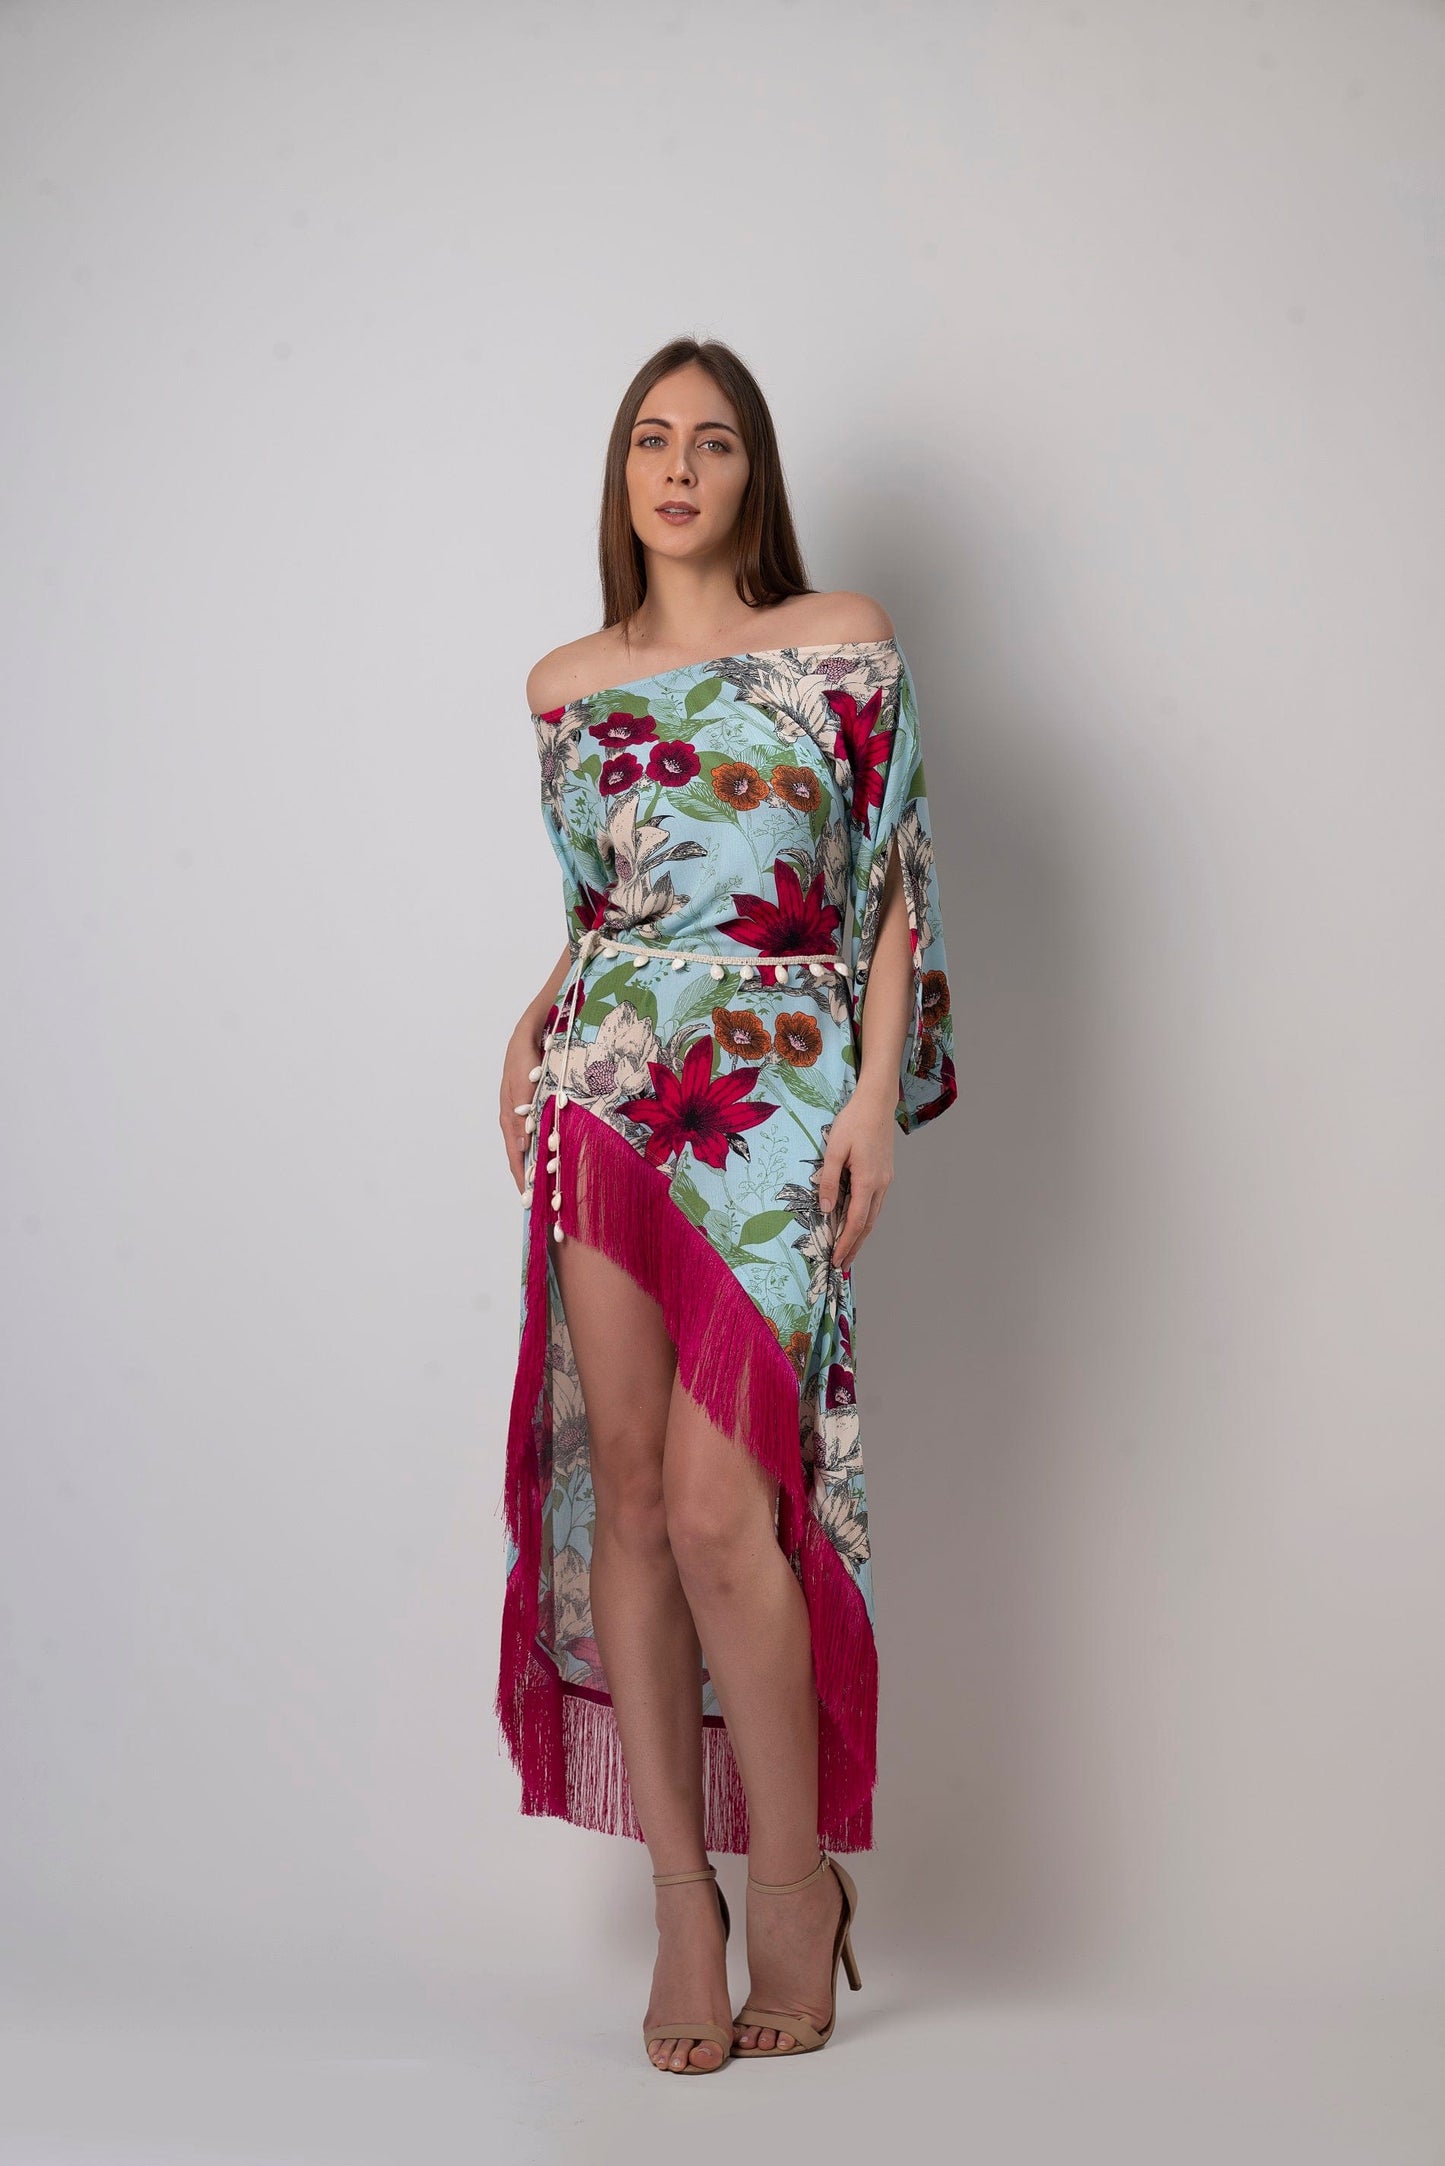 This one-shoulder floral kaftan dress is made of soft and lightweight viscose and is perfect for hot summer days by the beach